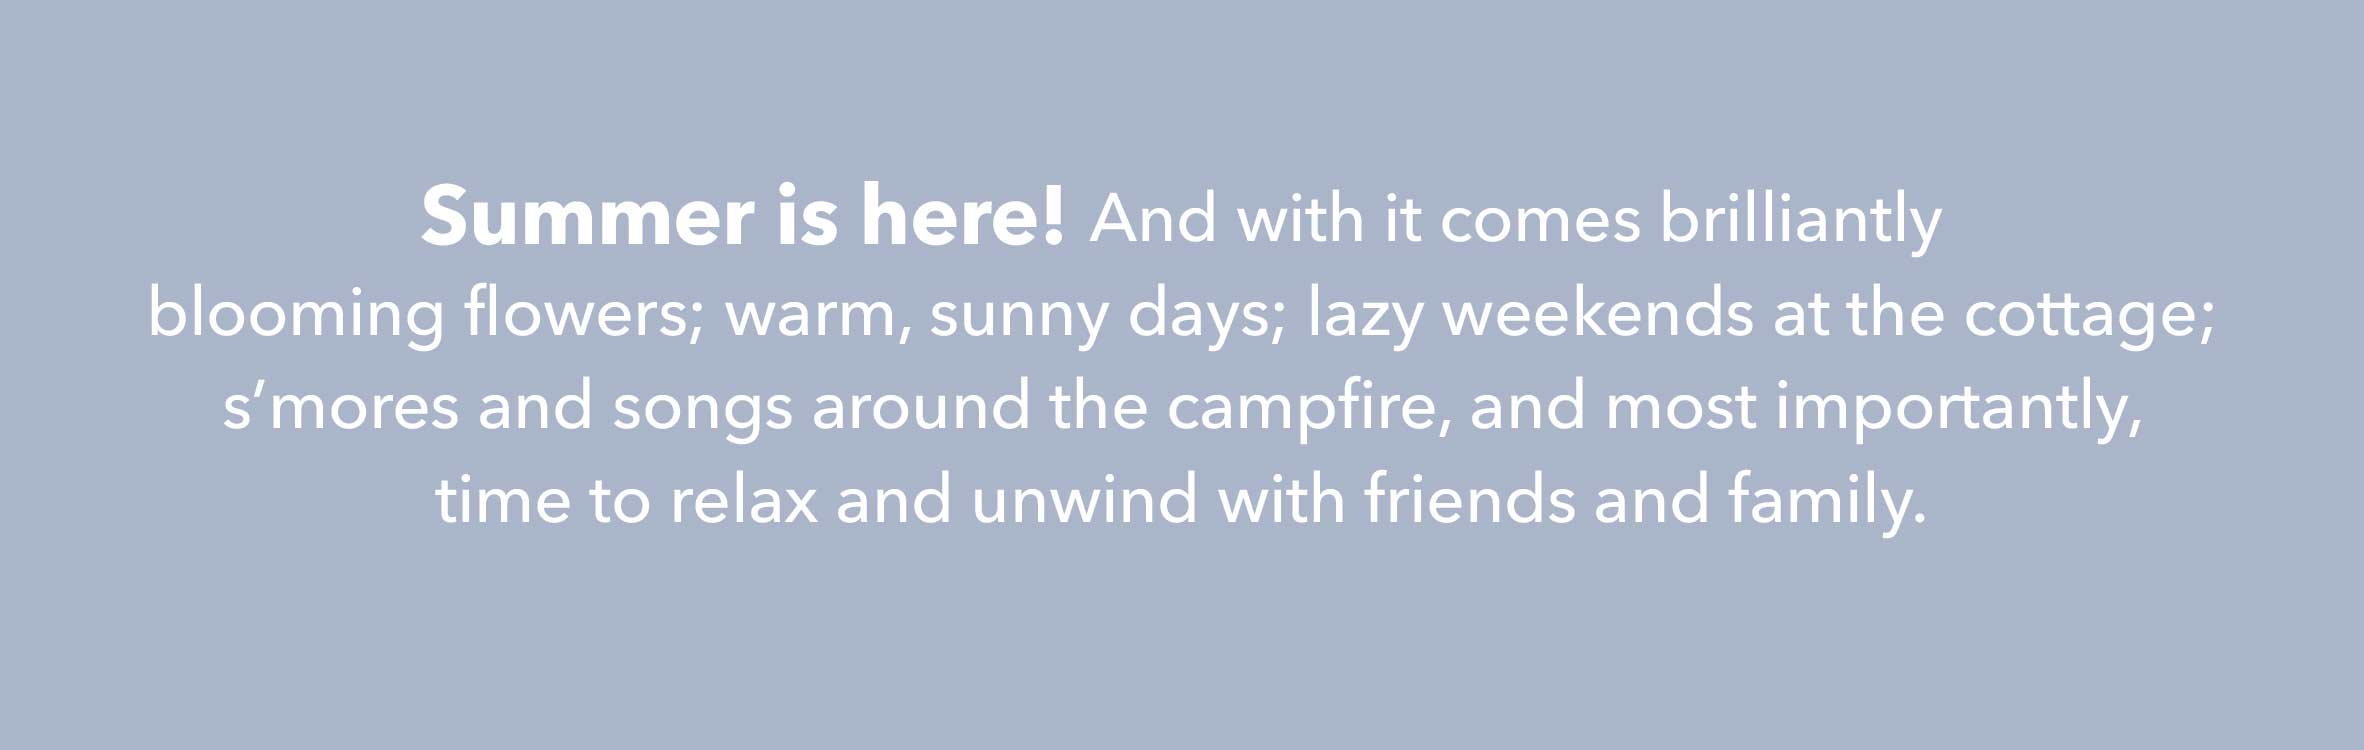 Summer is here! And with it comes brilliantly blooming flowers; warm, sunny days; lazy weekends at the cottage; s'mores and songs around the campfile, and most importantly, time to relax and unwind with friends and family.